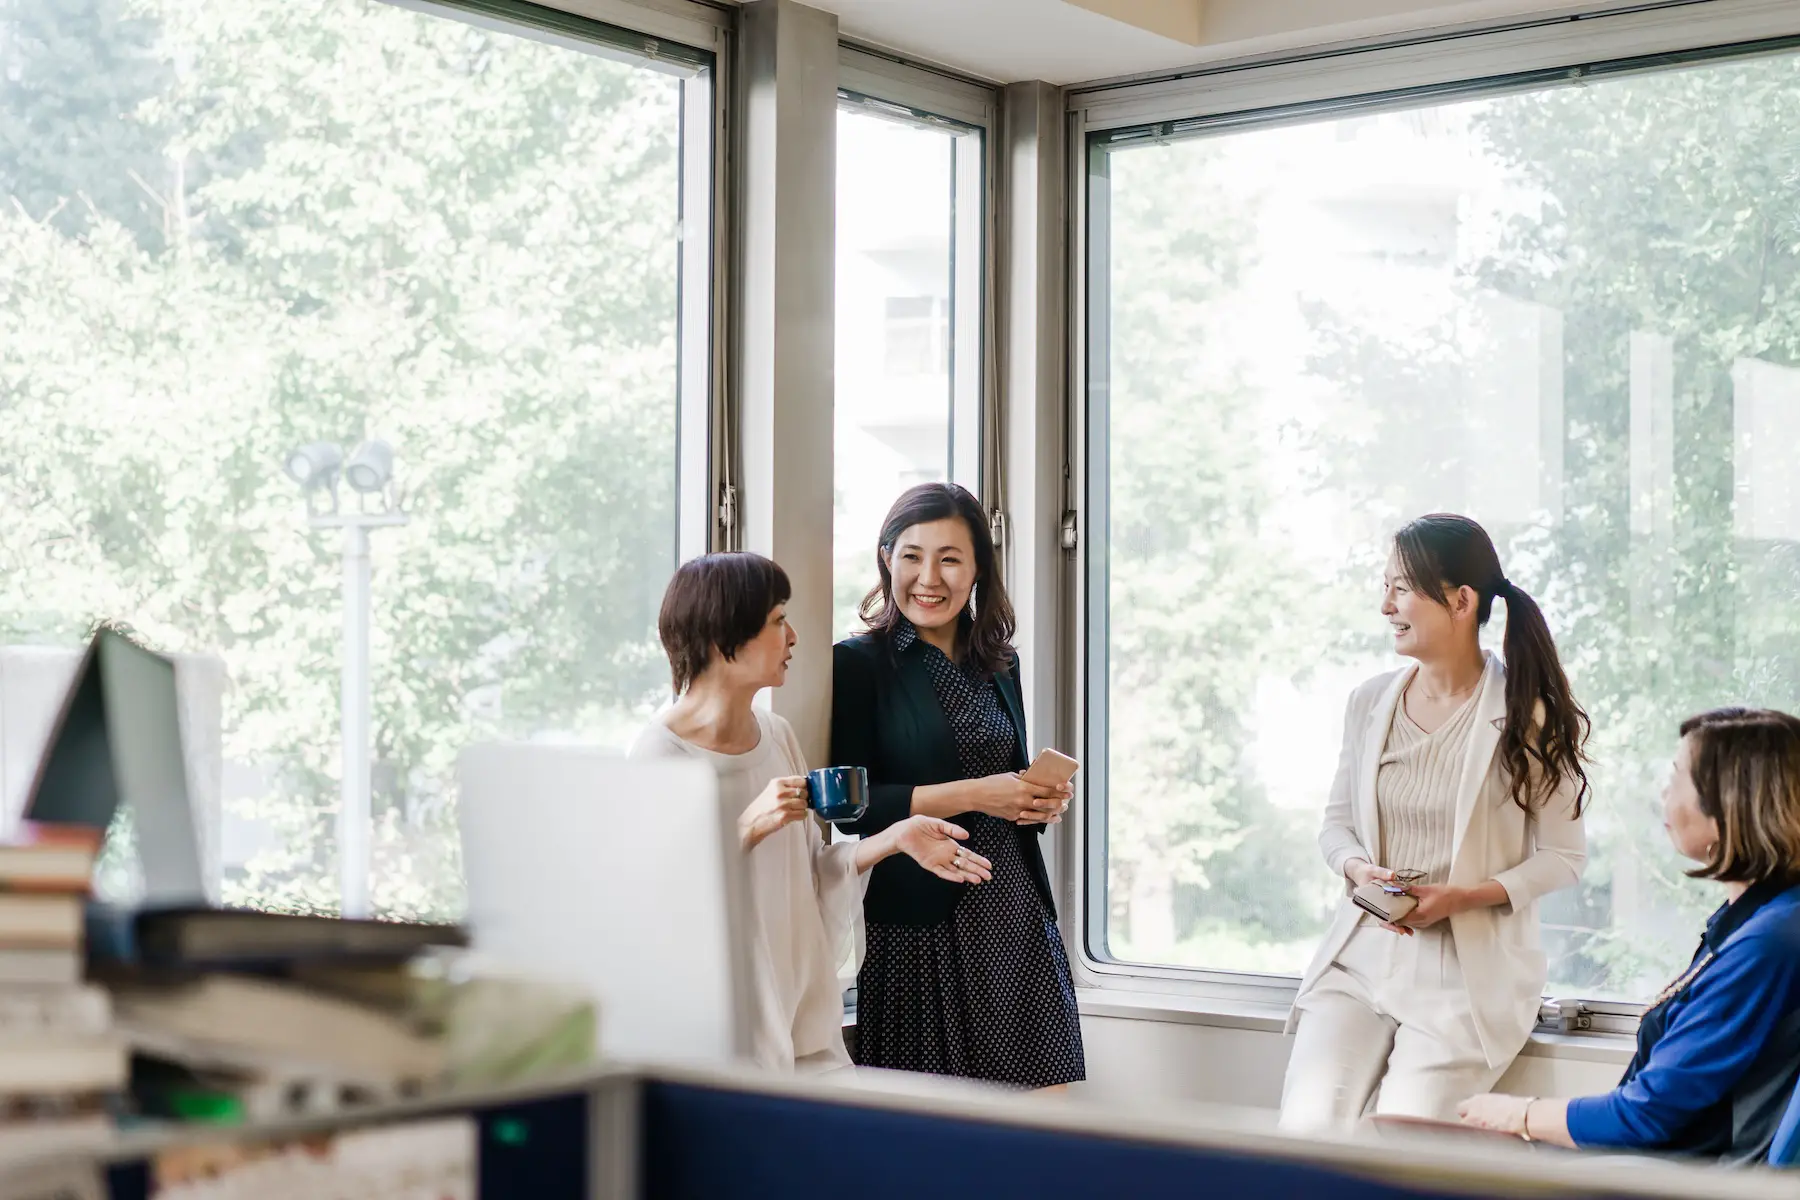 A group of relaxed businesswomen have a casual discussion in the office in front of windows